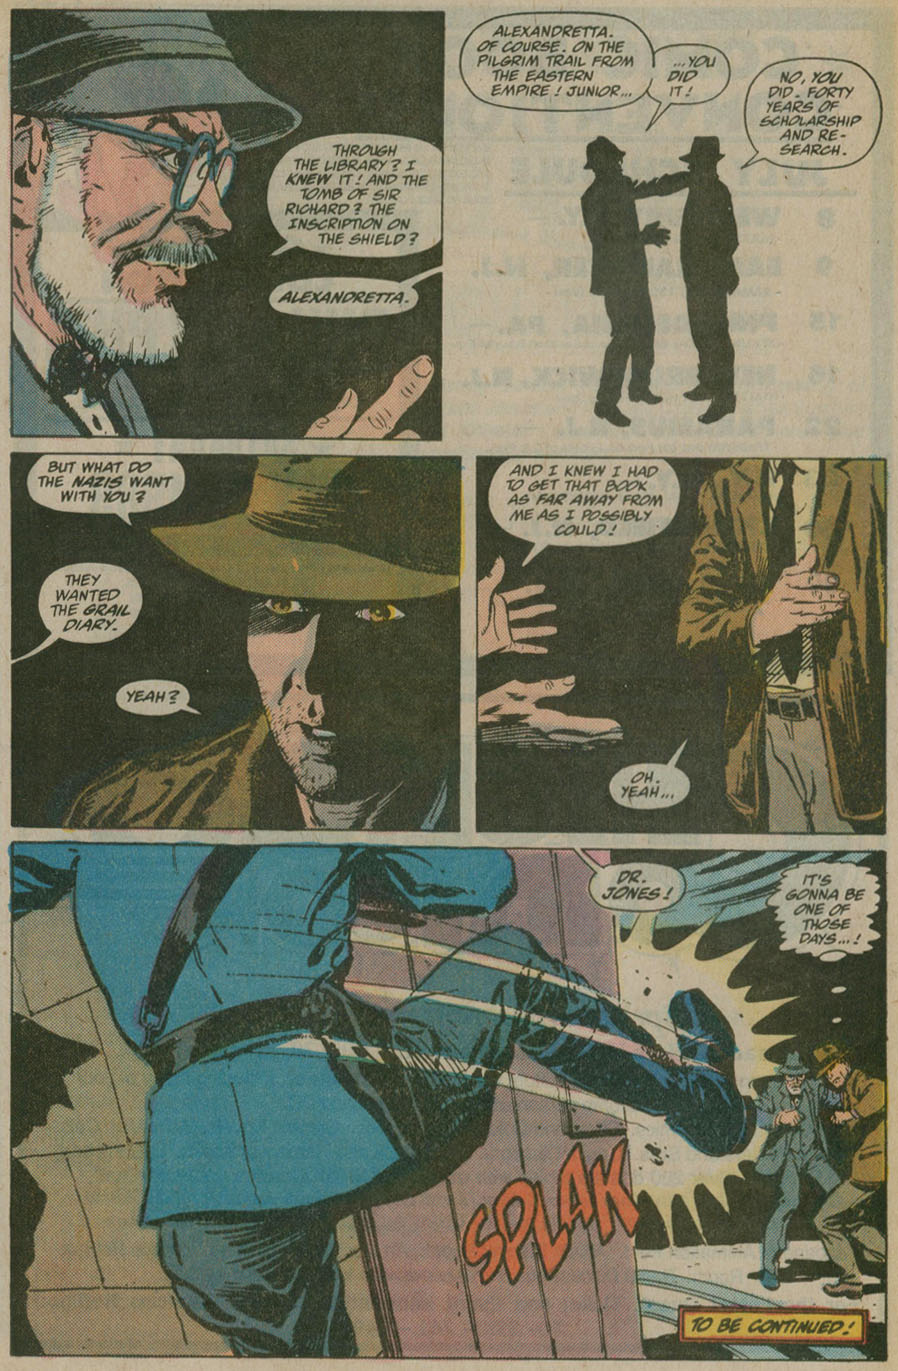 Indiana Jones And The Last Crusade 2 | Read Indiana Jones And The Last  Crusade 2 comic online in high quality. Read Full Comic online for free -  Read comics online in